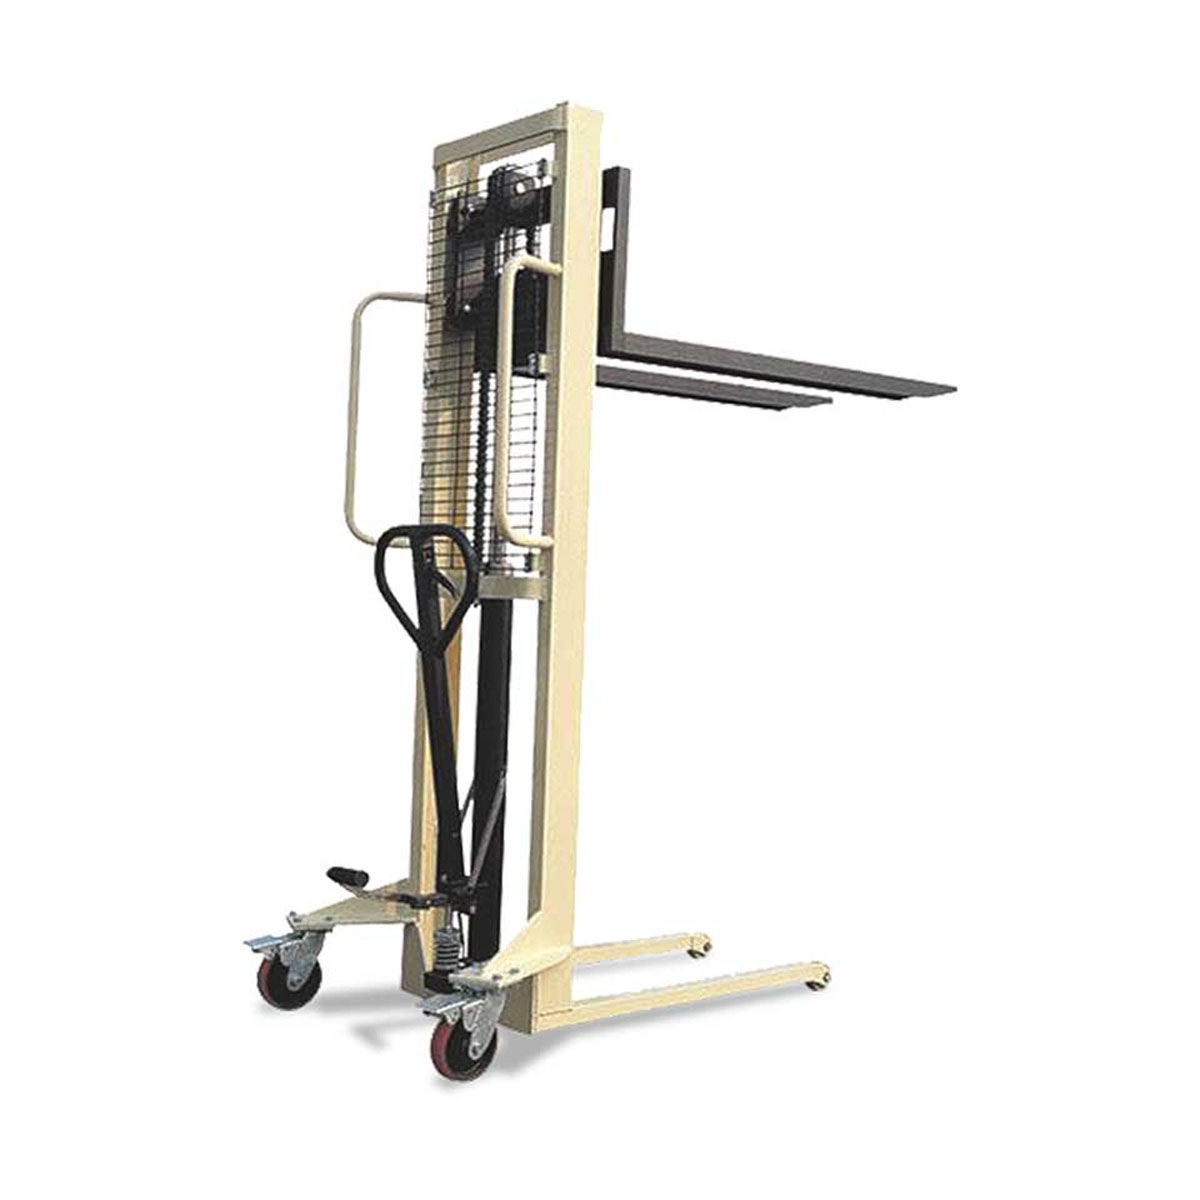 Buy Pallet Stacker in Pallet Stackers from Astrolift NZ